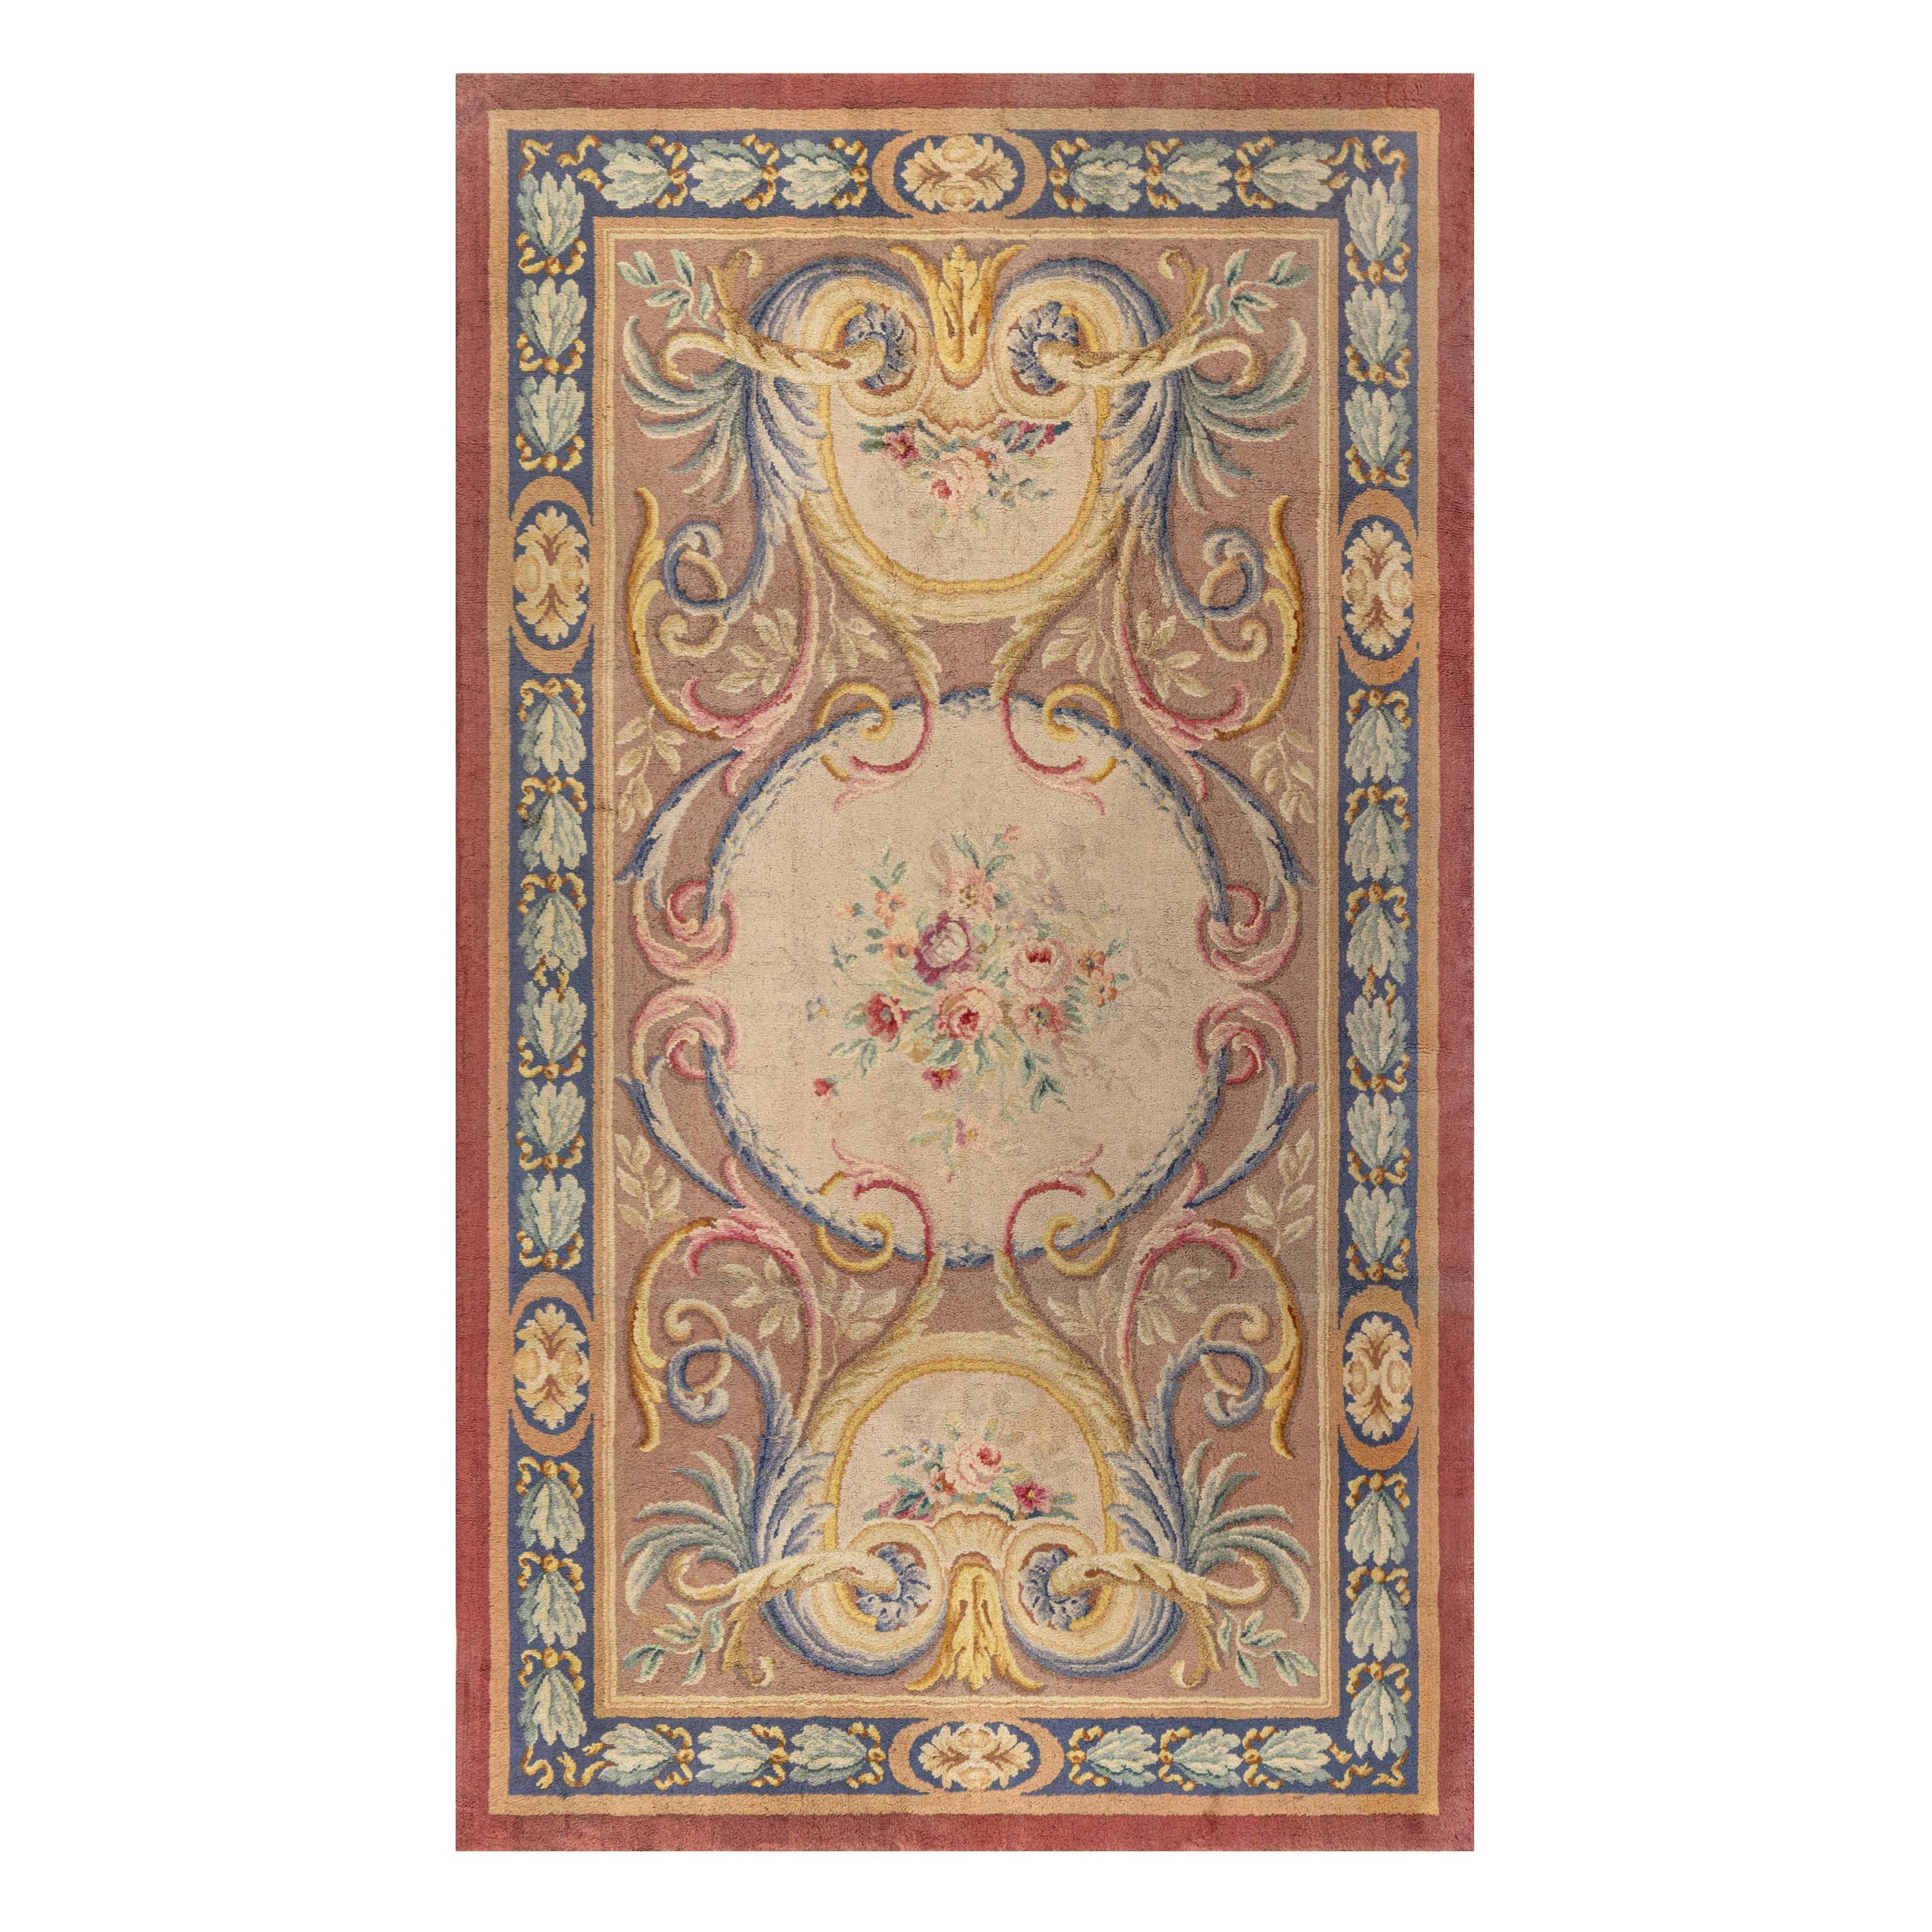 Early 20th Century Classic French Savonnerie Rug